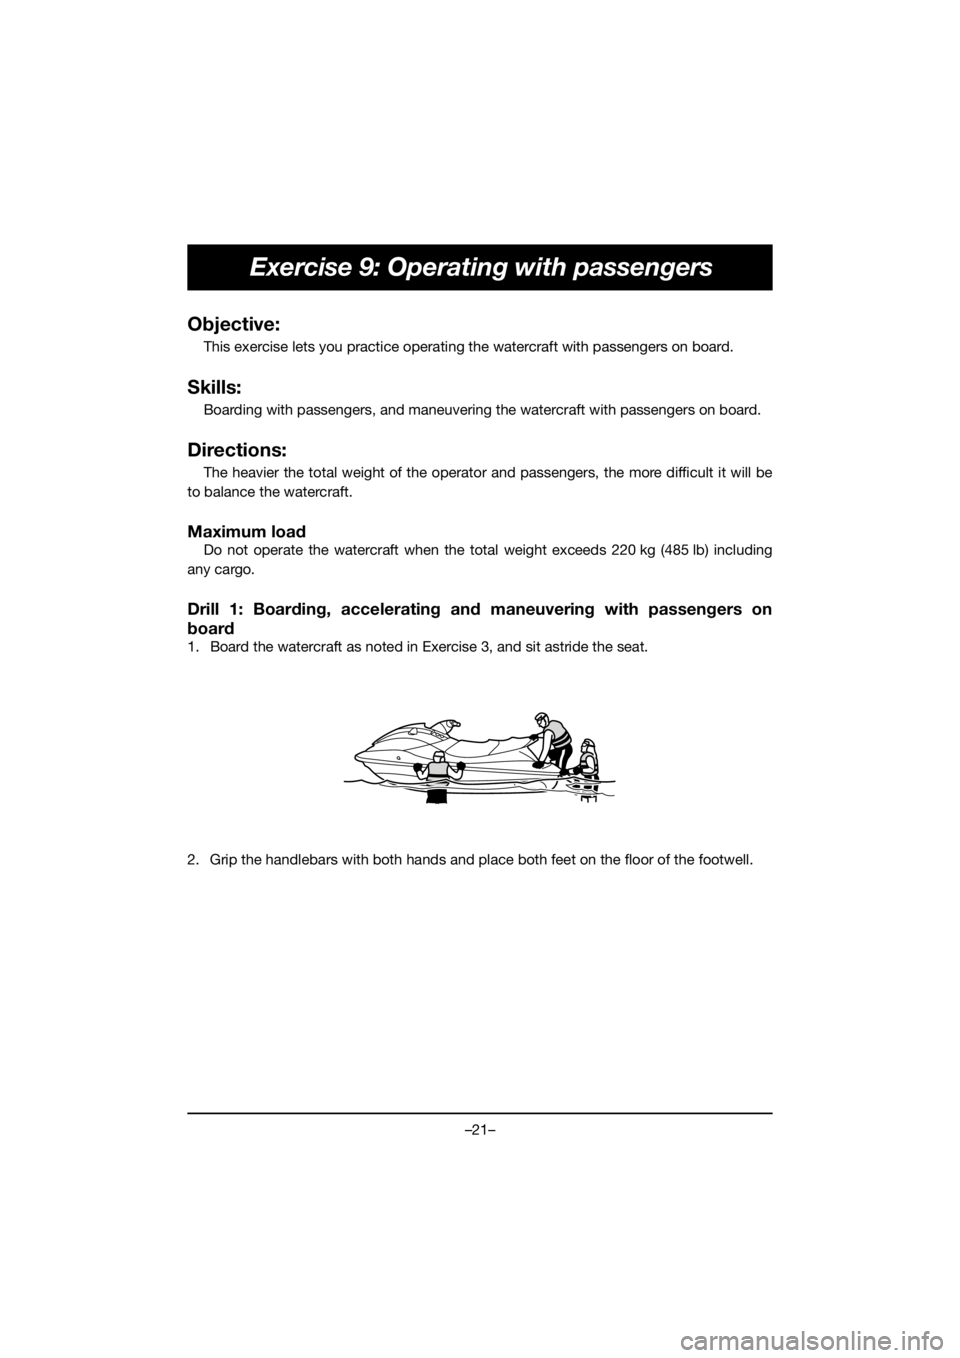 YAMAHA EXR 2020  Bruksanvisningar (in Swedish) –21–
Exercise 9: Operating with passengers
Objective:
This exercise lets you practice operating the watercraft with passengers on board.
Skills:
Boarding with passengers, and maneuvering the water